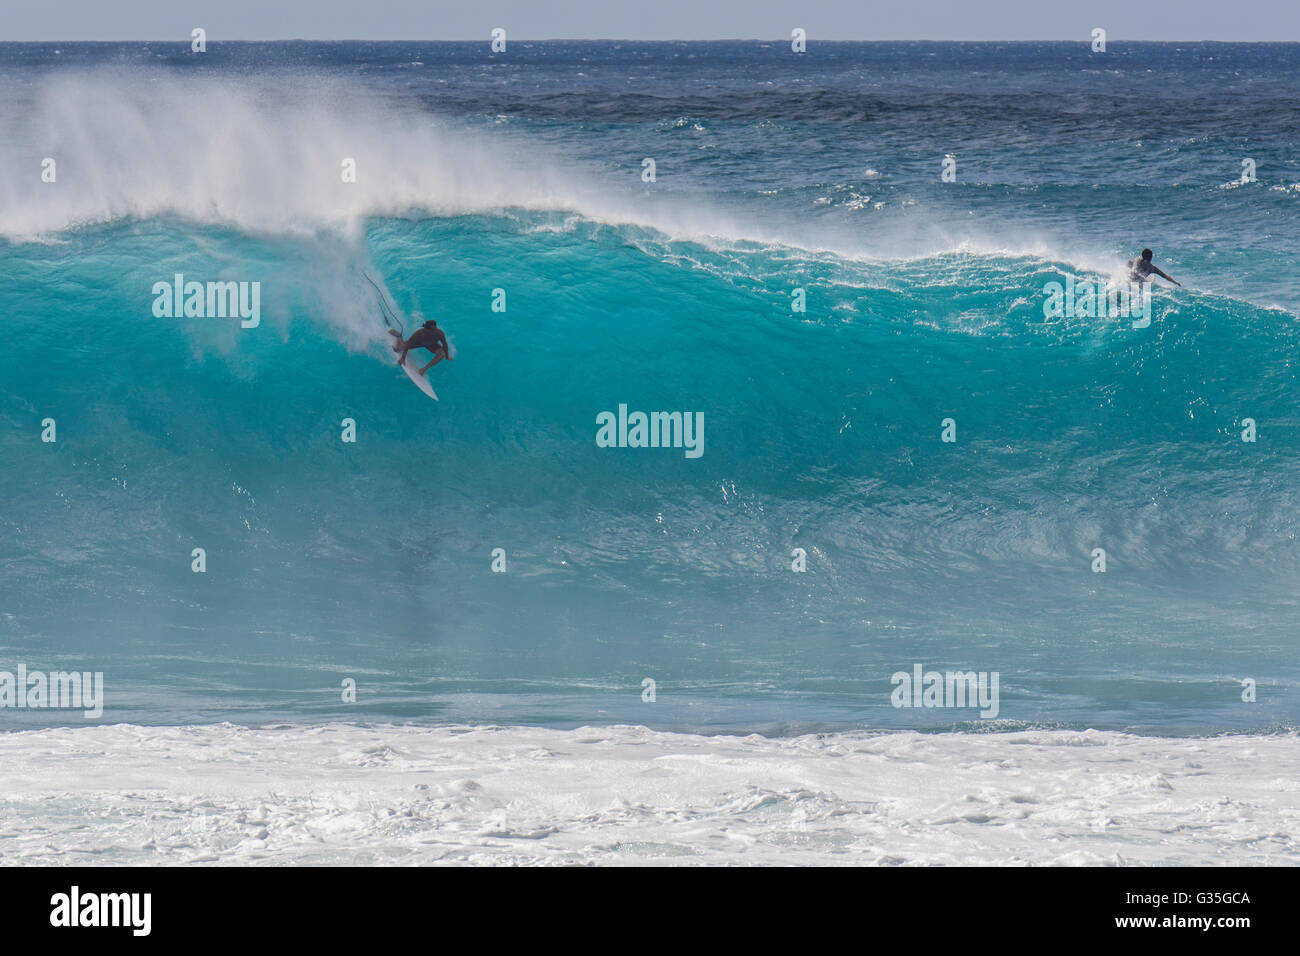 A surfer at Banzai Pipeline during a large swell in the afternoon on the North Shore of Oahu. Stock Photo